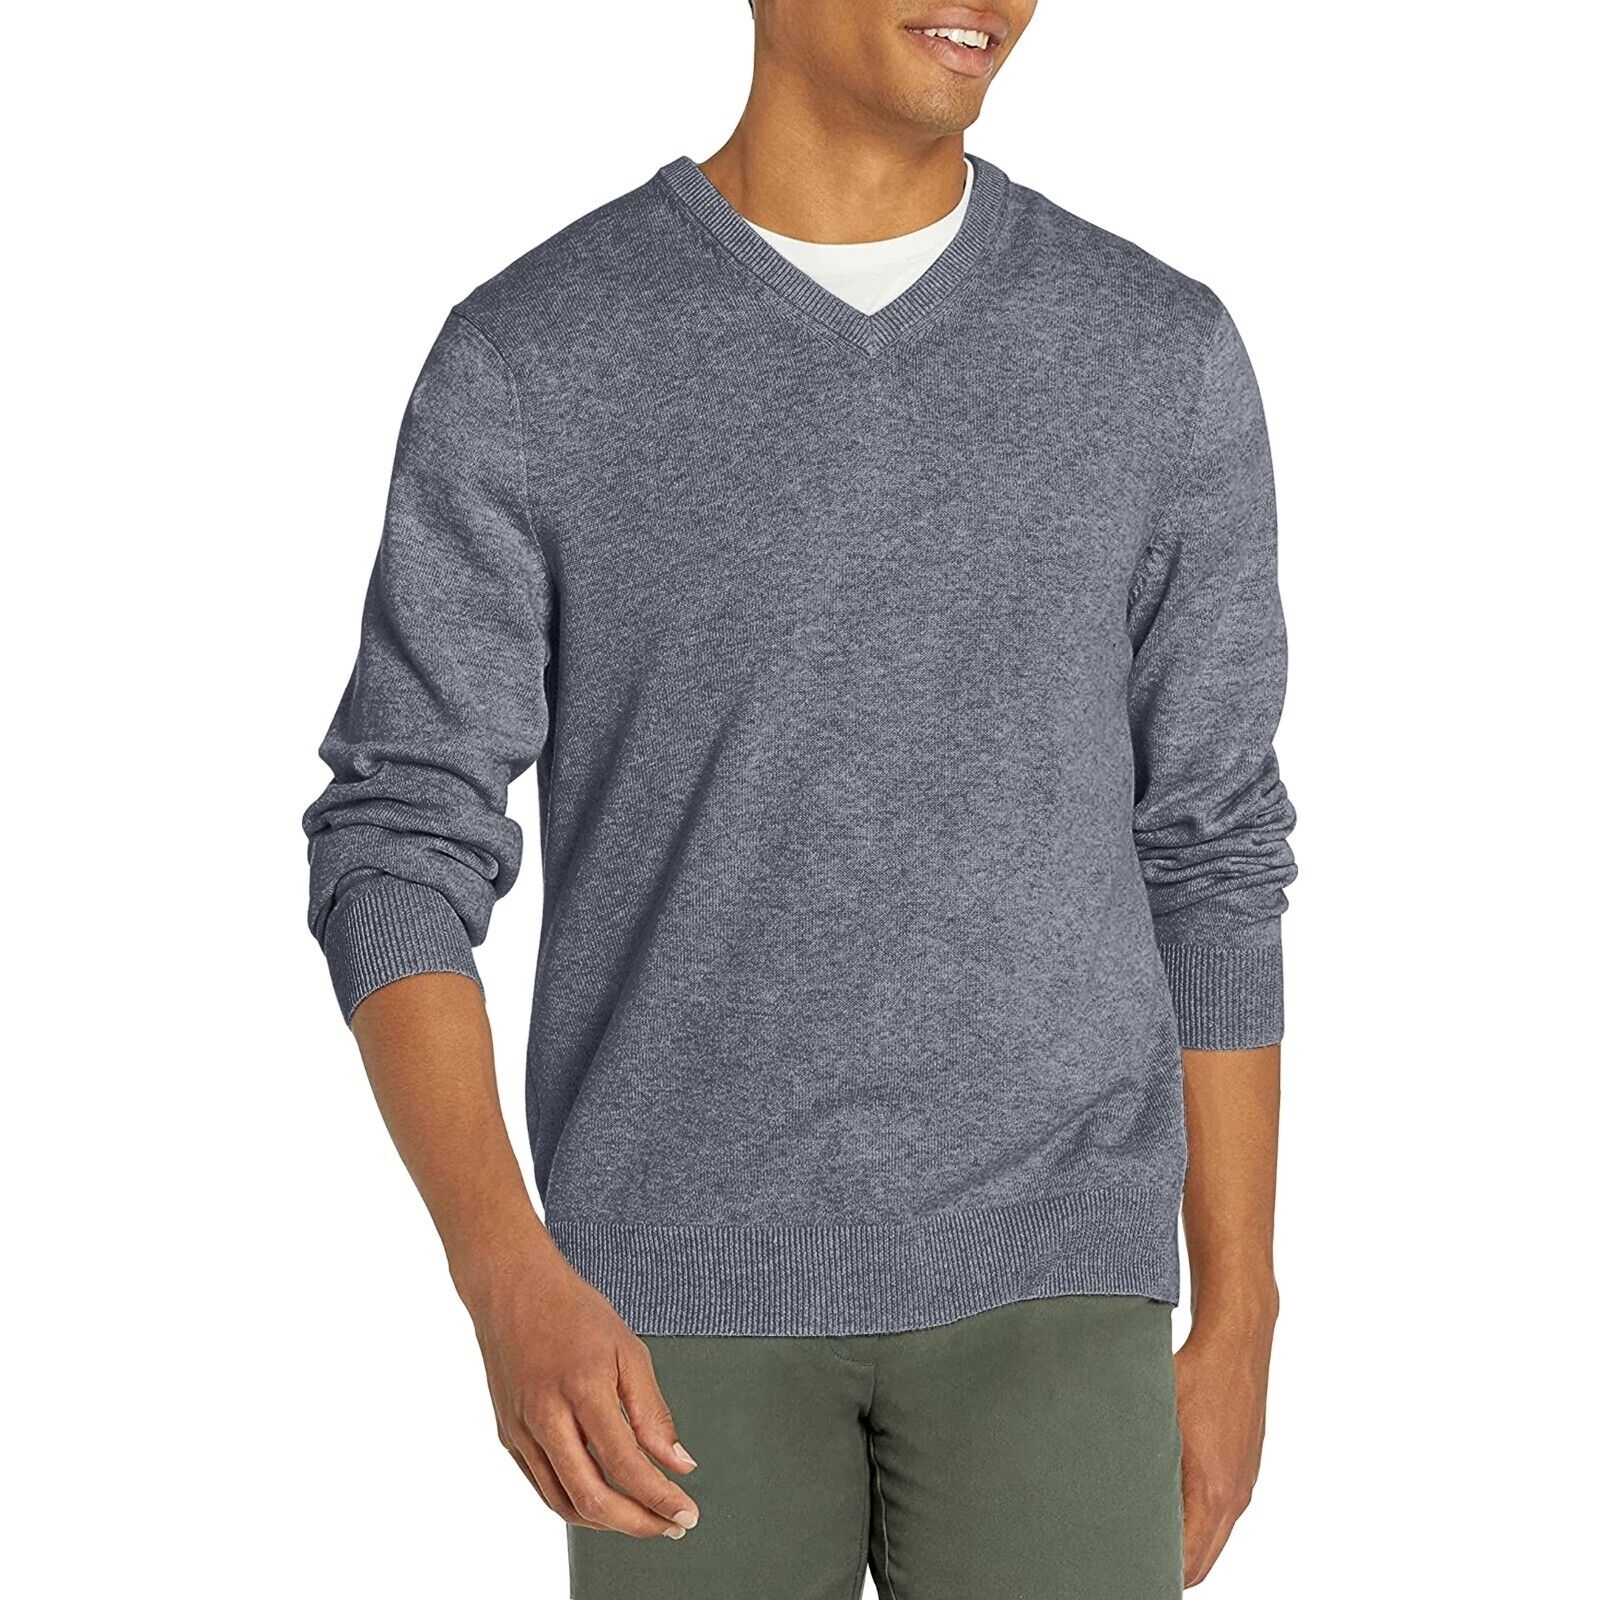 Men's Casual Ultra-Soft Slim Fit Warm Knit Pullover V-Neck Sweater For Winter - Grey, XX-Large